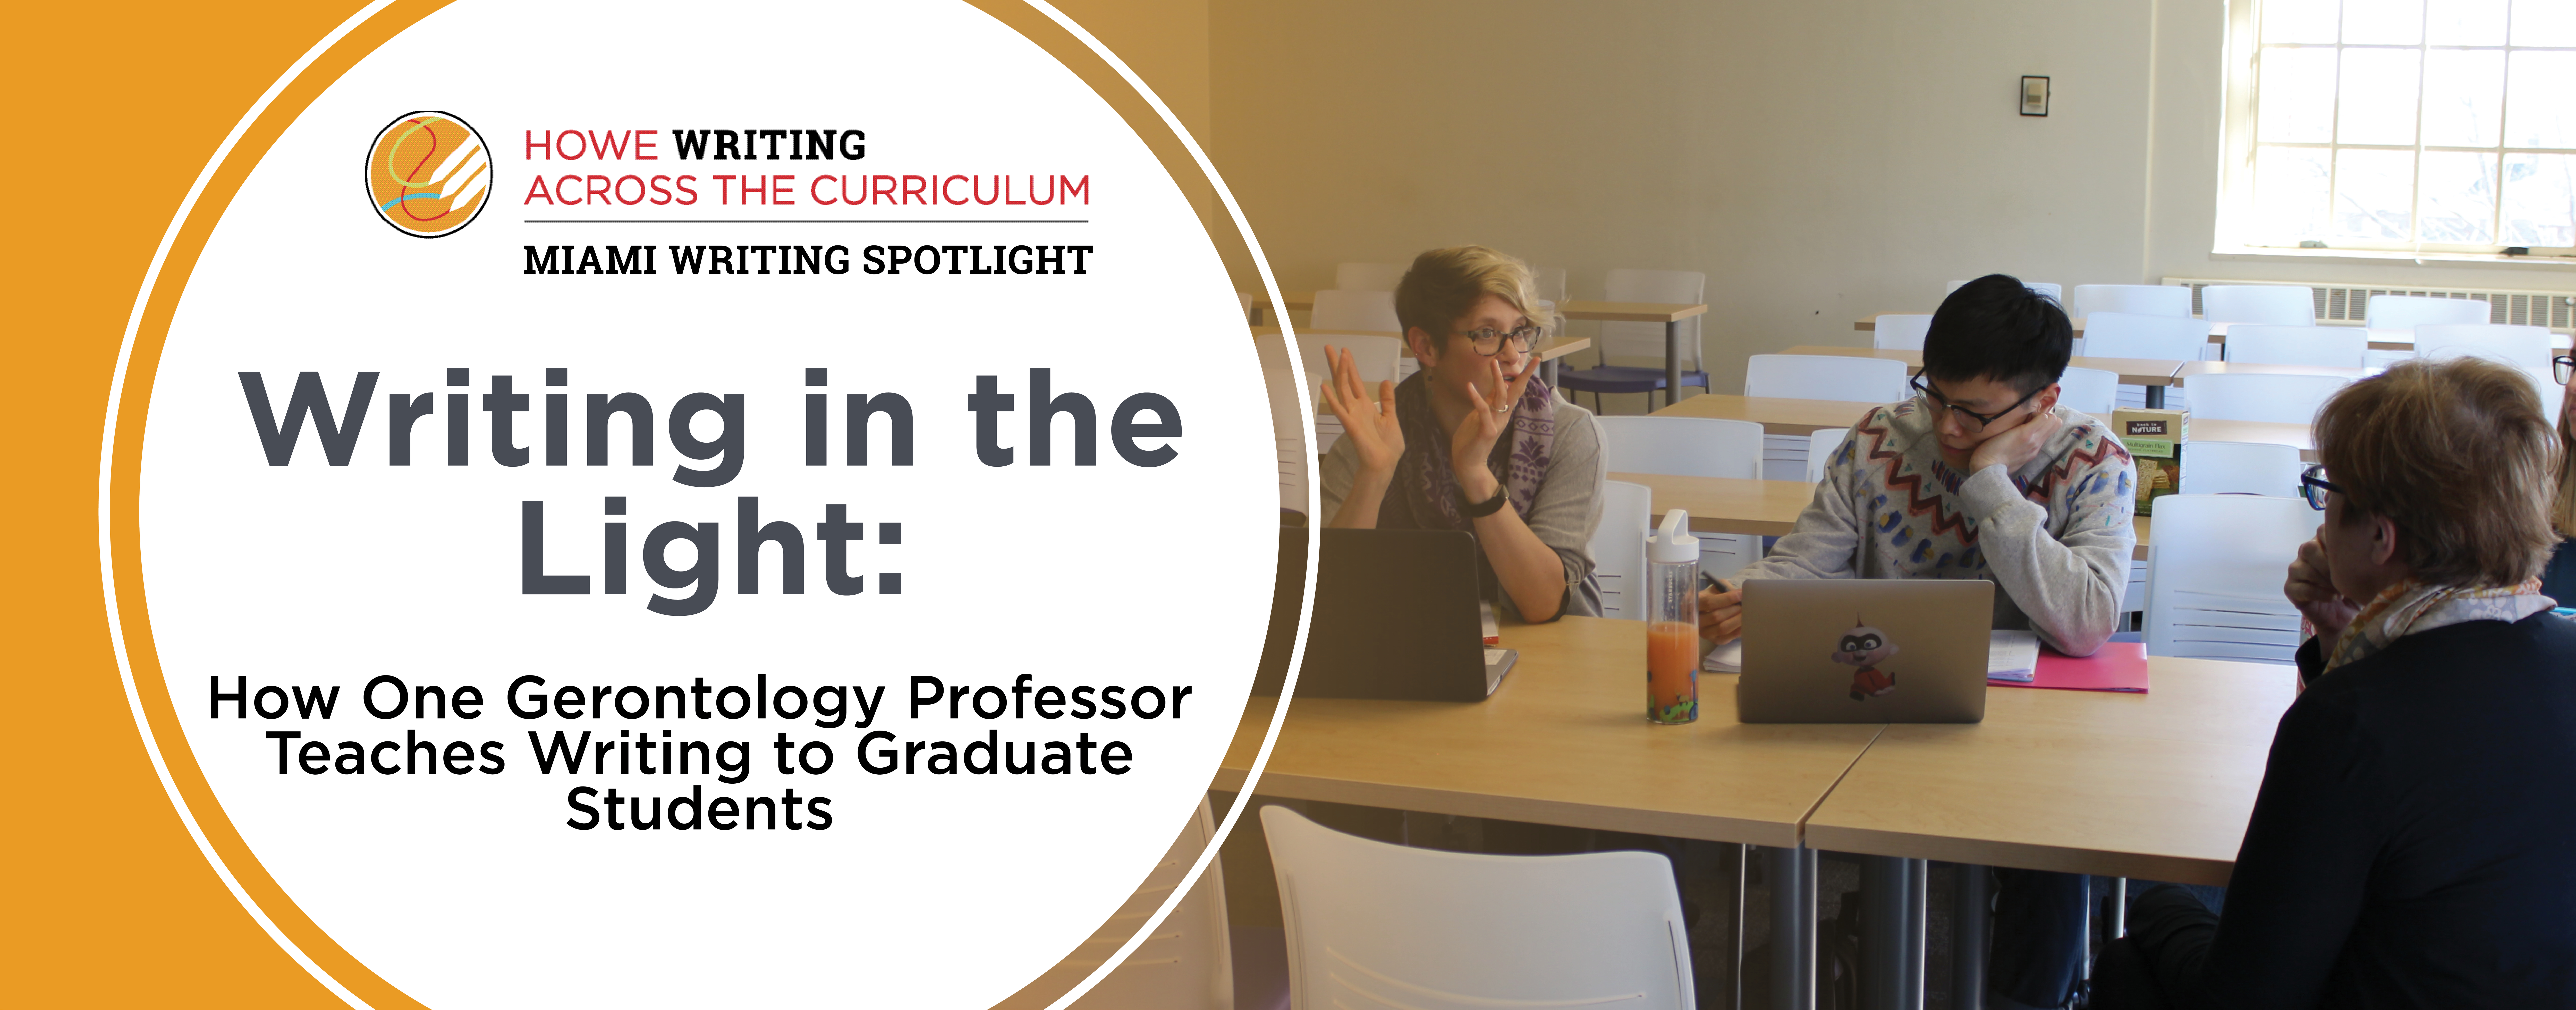 Writing in the light: How one gerontology professor teaches writing to graduate students 